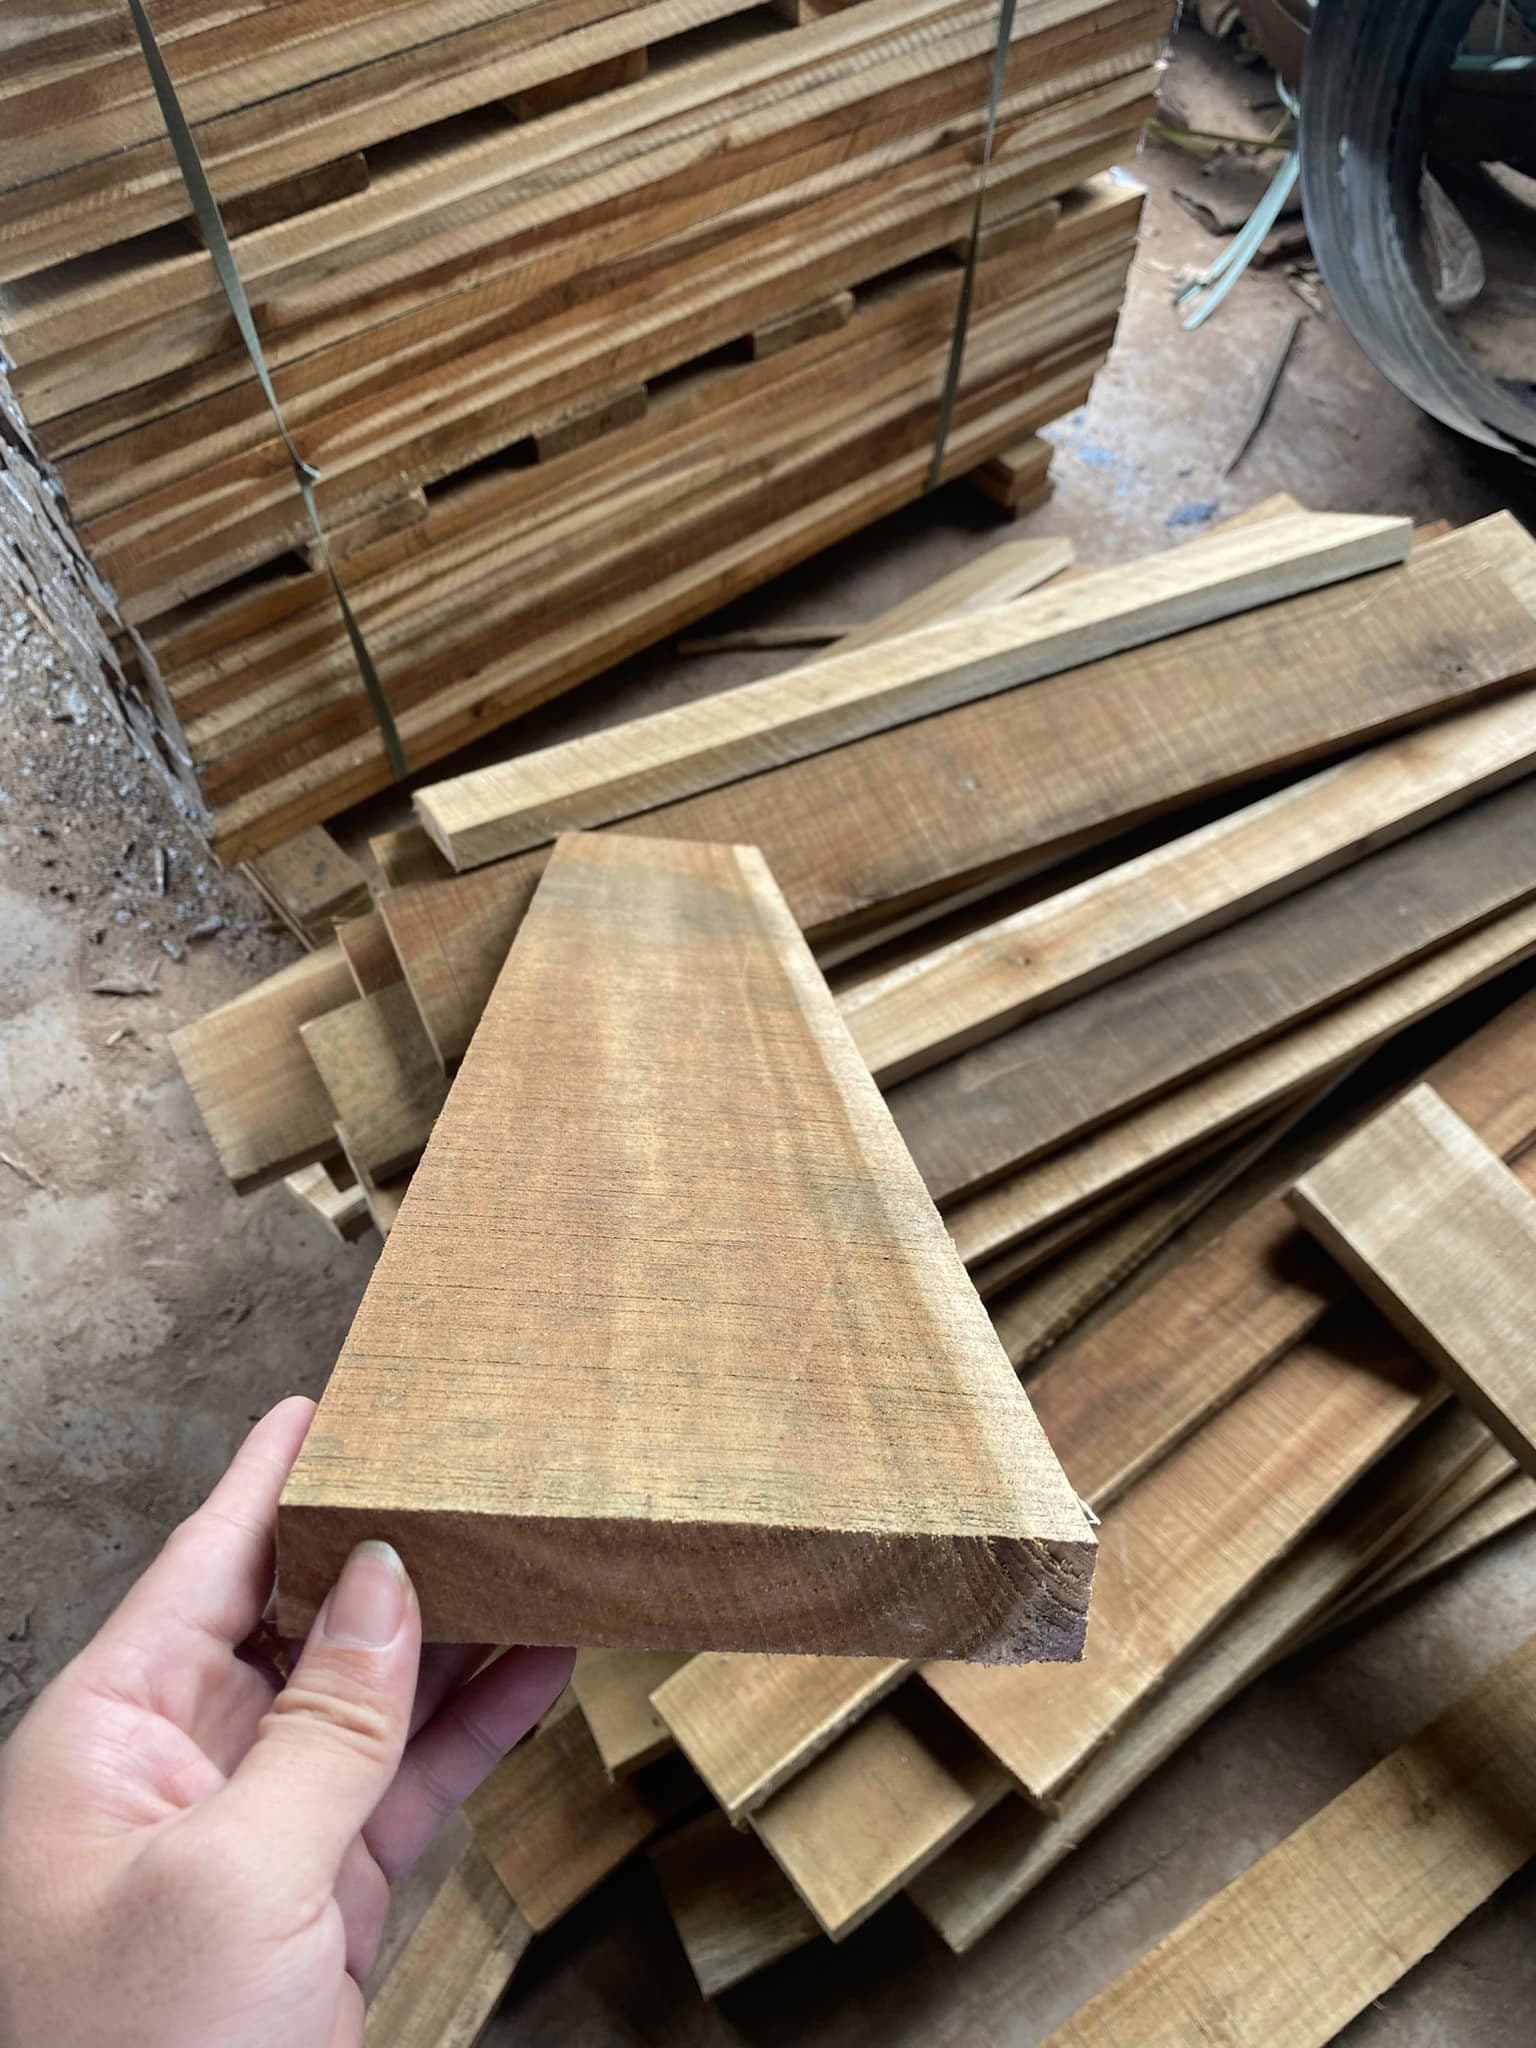 Acacia sawn timber wooden for wood industrial best price from Vietnam factory 2023 Safimex company